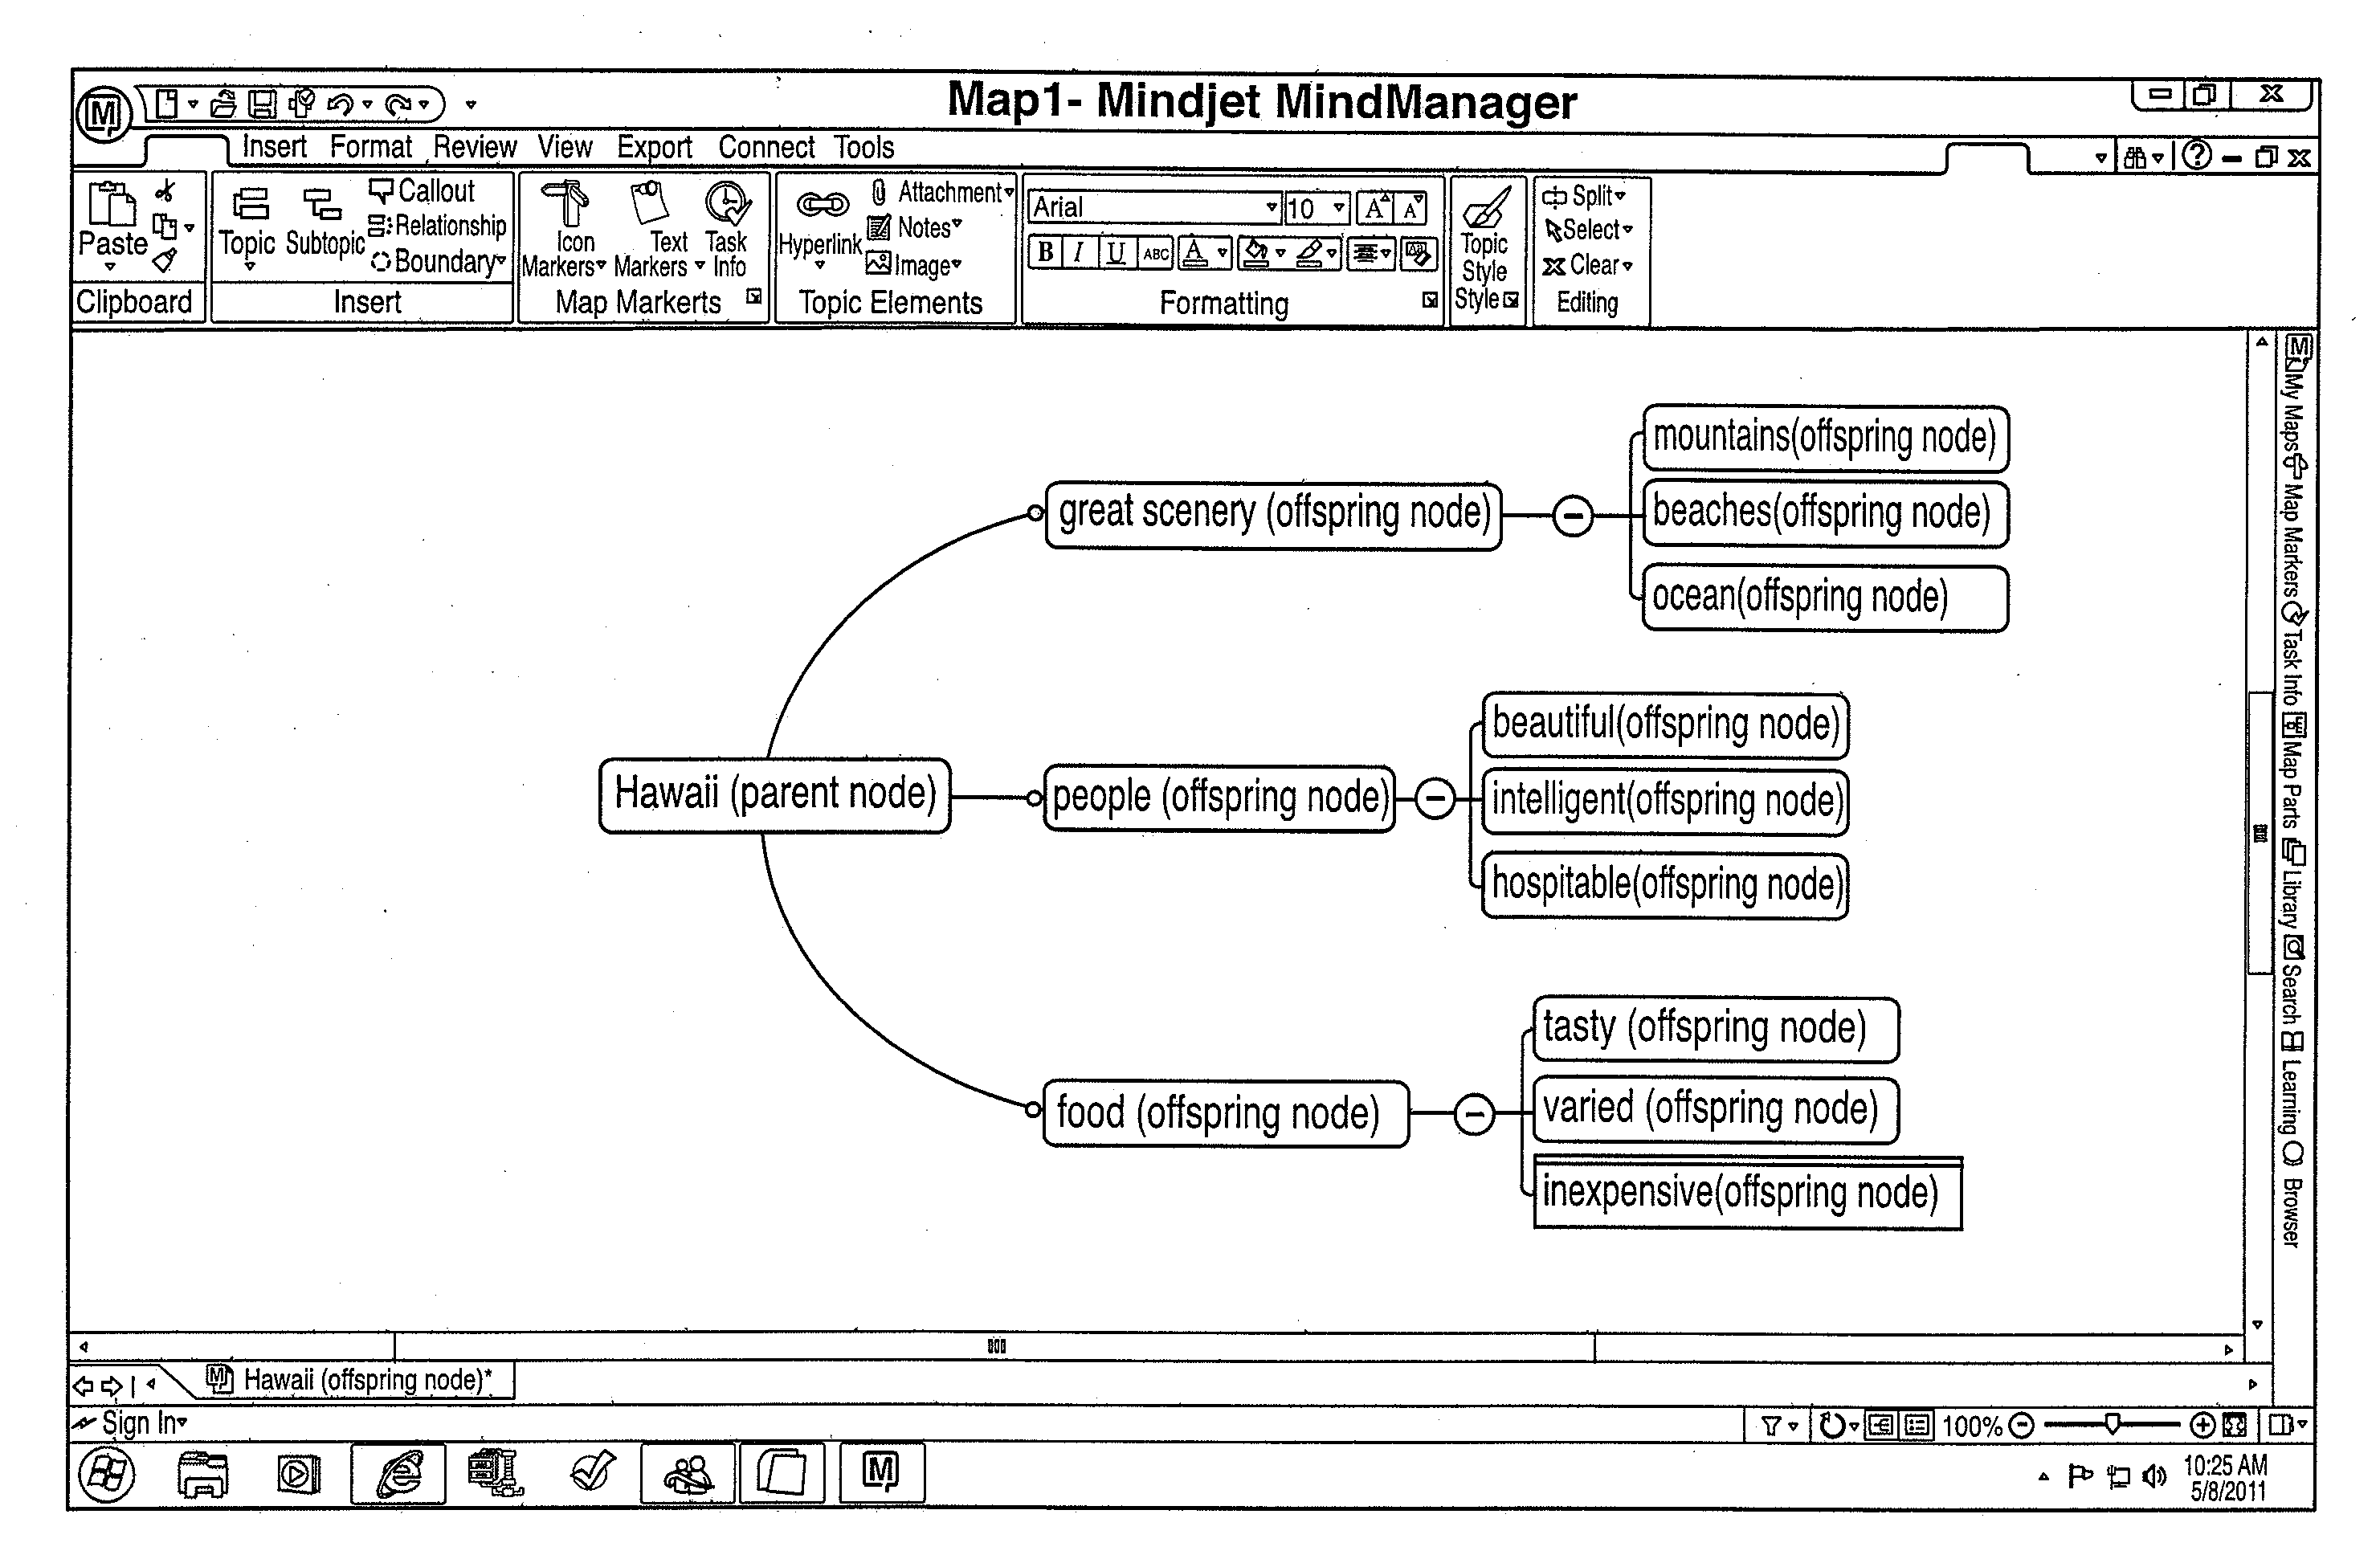 Method for relational analysis of parsed input for visual mapping of knowledge information